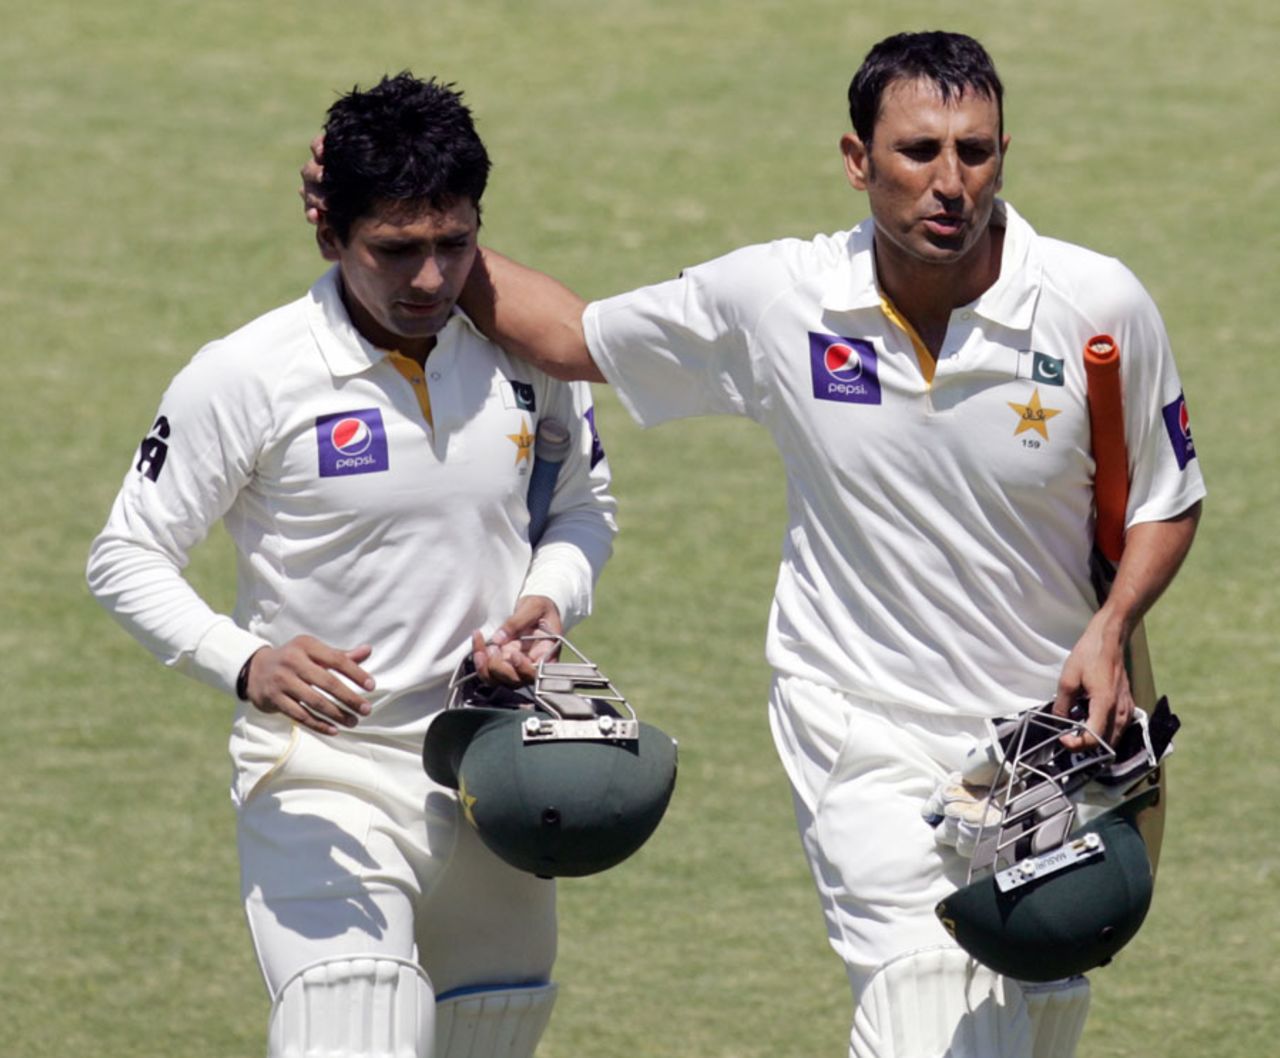 Younis Khan and Adnan Akmal walk off the pitch for the lunch break, Zimbabwe v Pakistan, 1st Test, 4th day, Harare, September 6, 2013